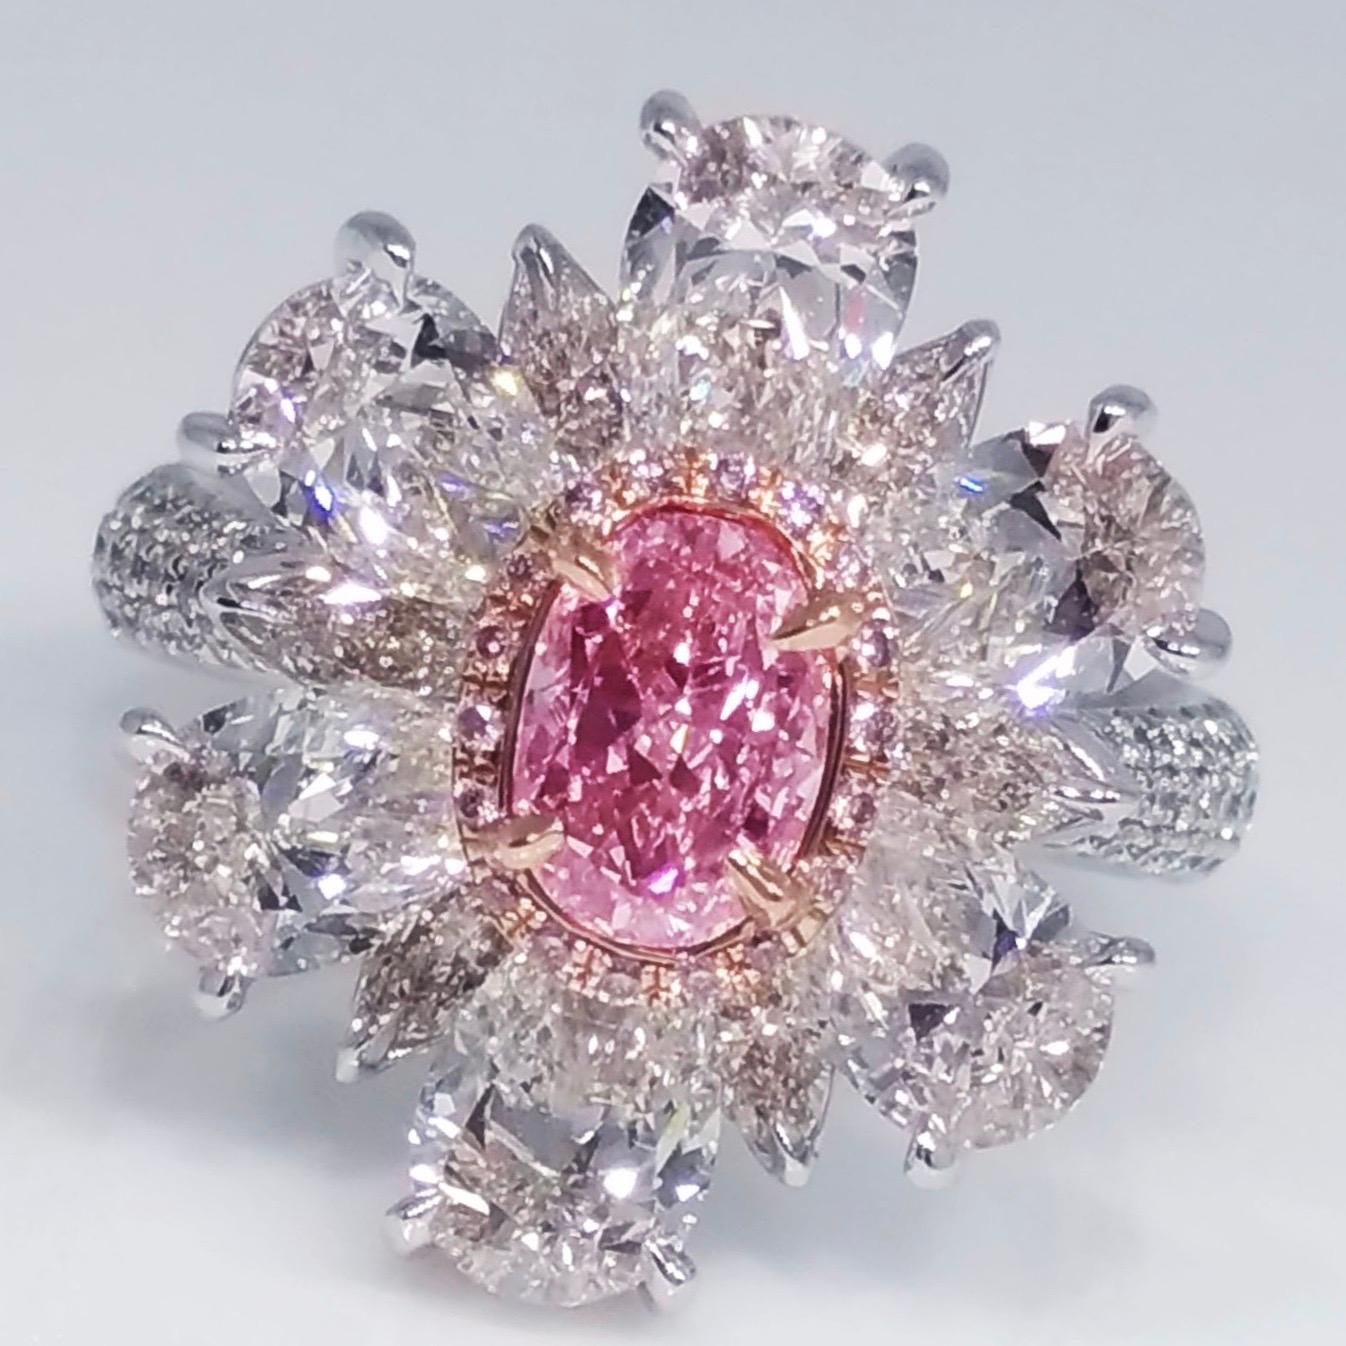 From the Emilio Jewelry Museum Vault, Showcasing a stunning 1.00 carat Gia Certified natural fancy purplish pink diamond center. What makes this diamond even more special is the purplish tone adds a special 